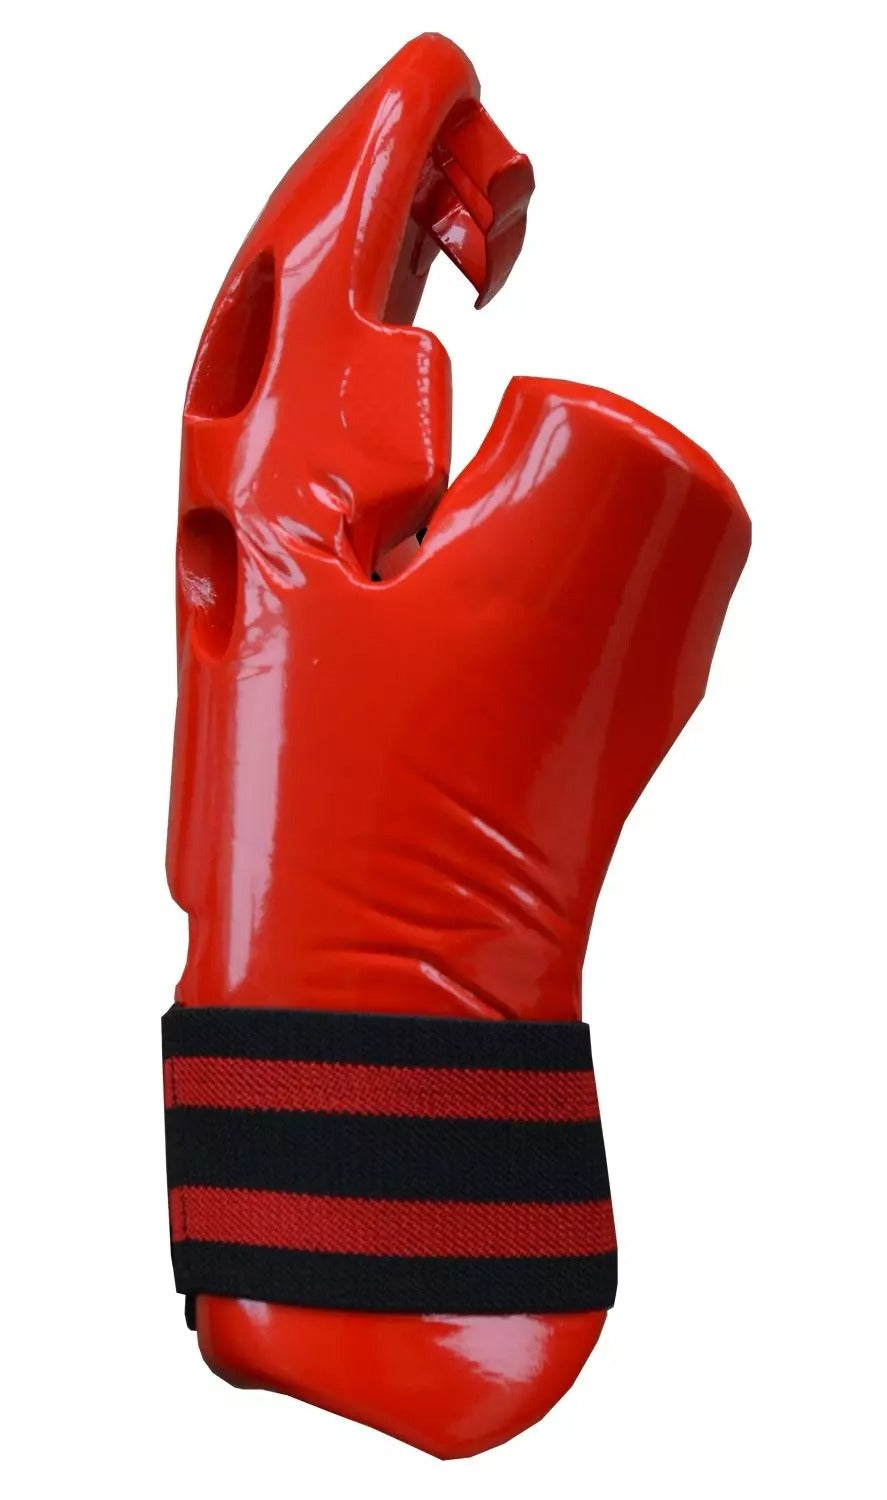 Cimac Dipped Foam Kickboxing Gloves Martial Arts Mitts